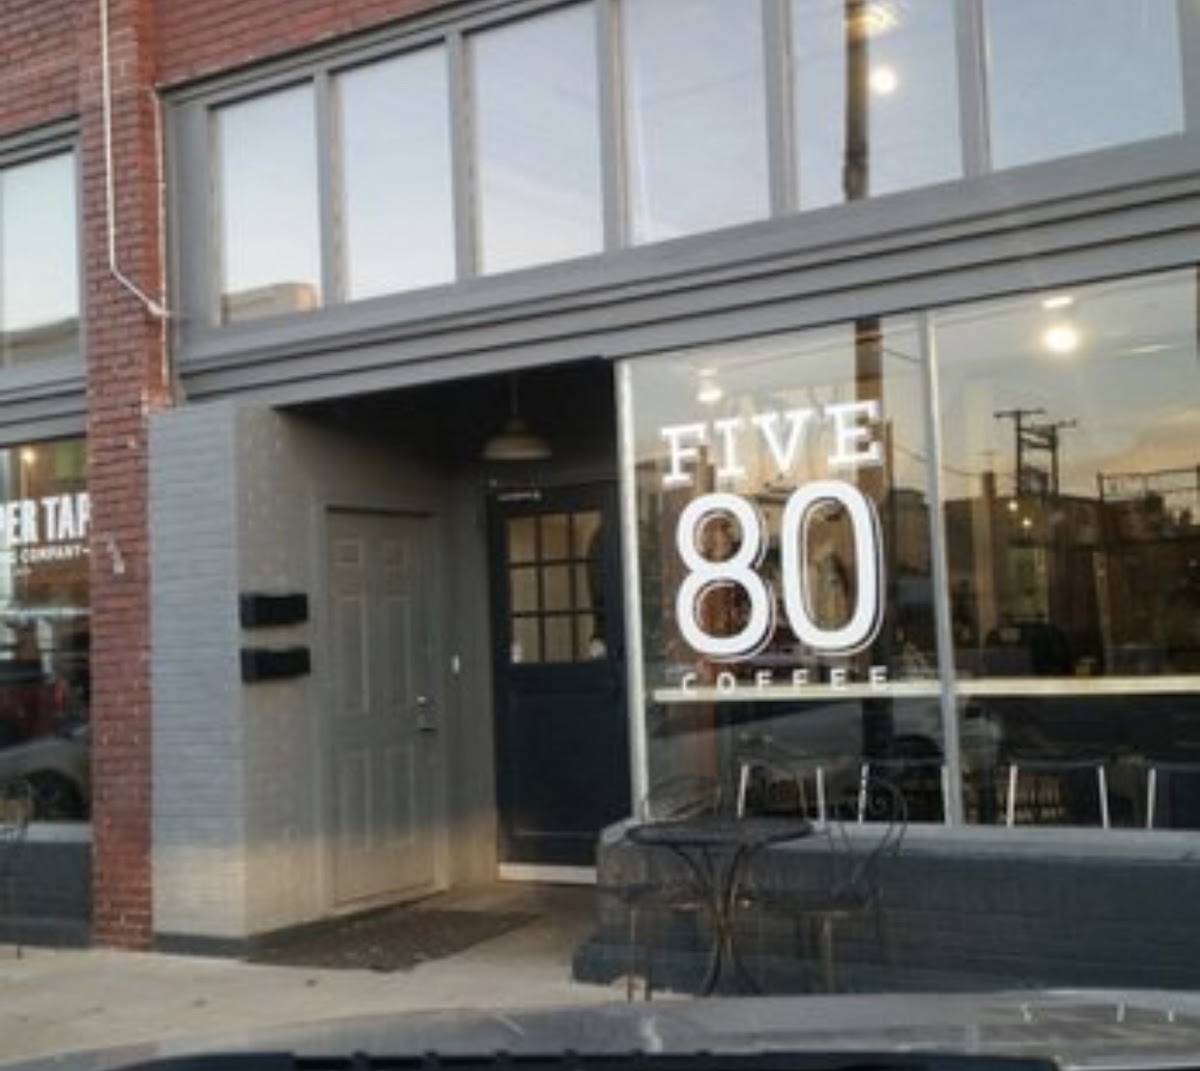 Gluten-Free at Five80 Coffeehouse